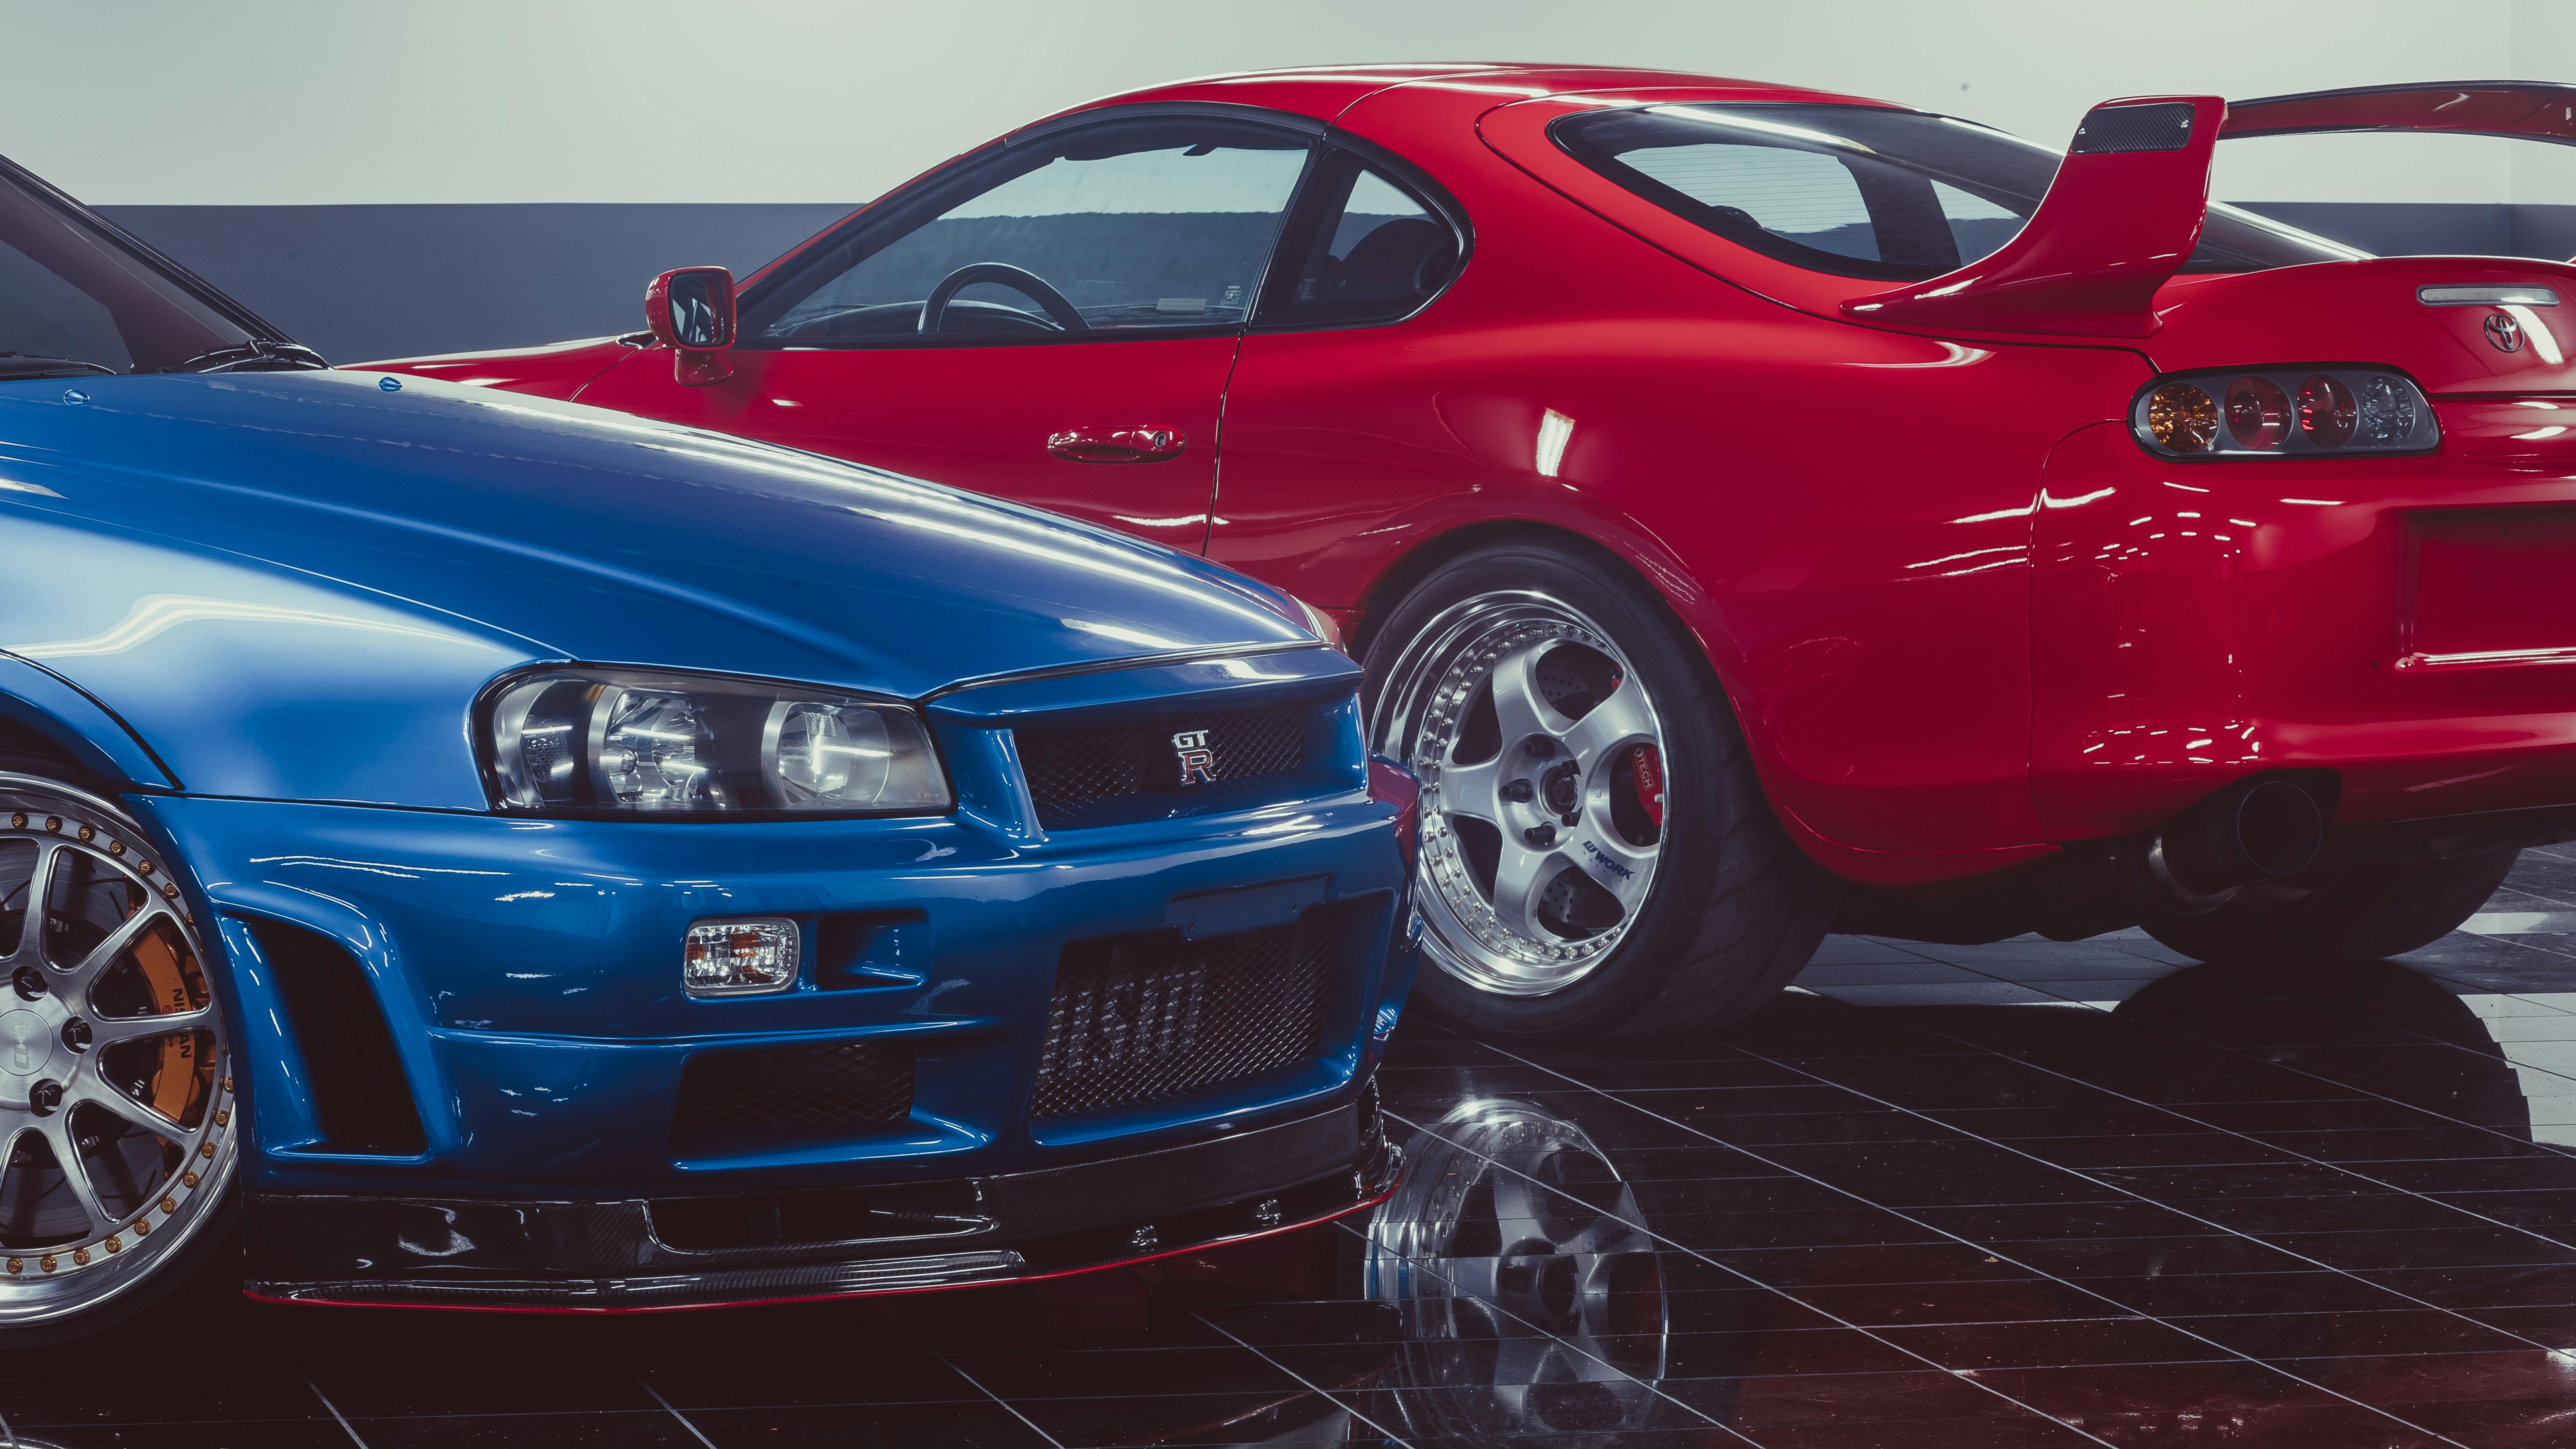 Supra Photos, Download The BEST Free Supra Stock Photos & HD Images